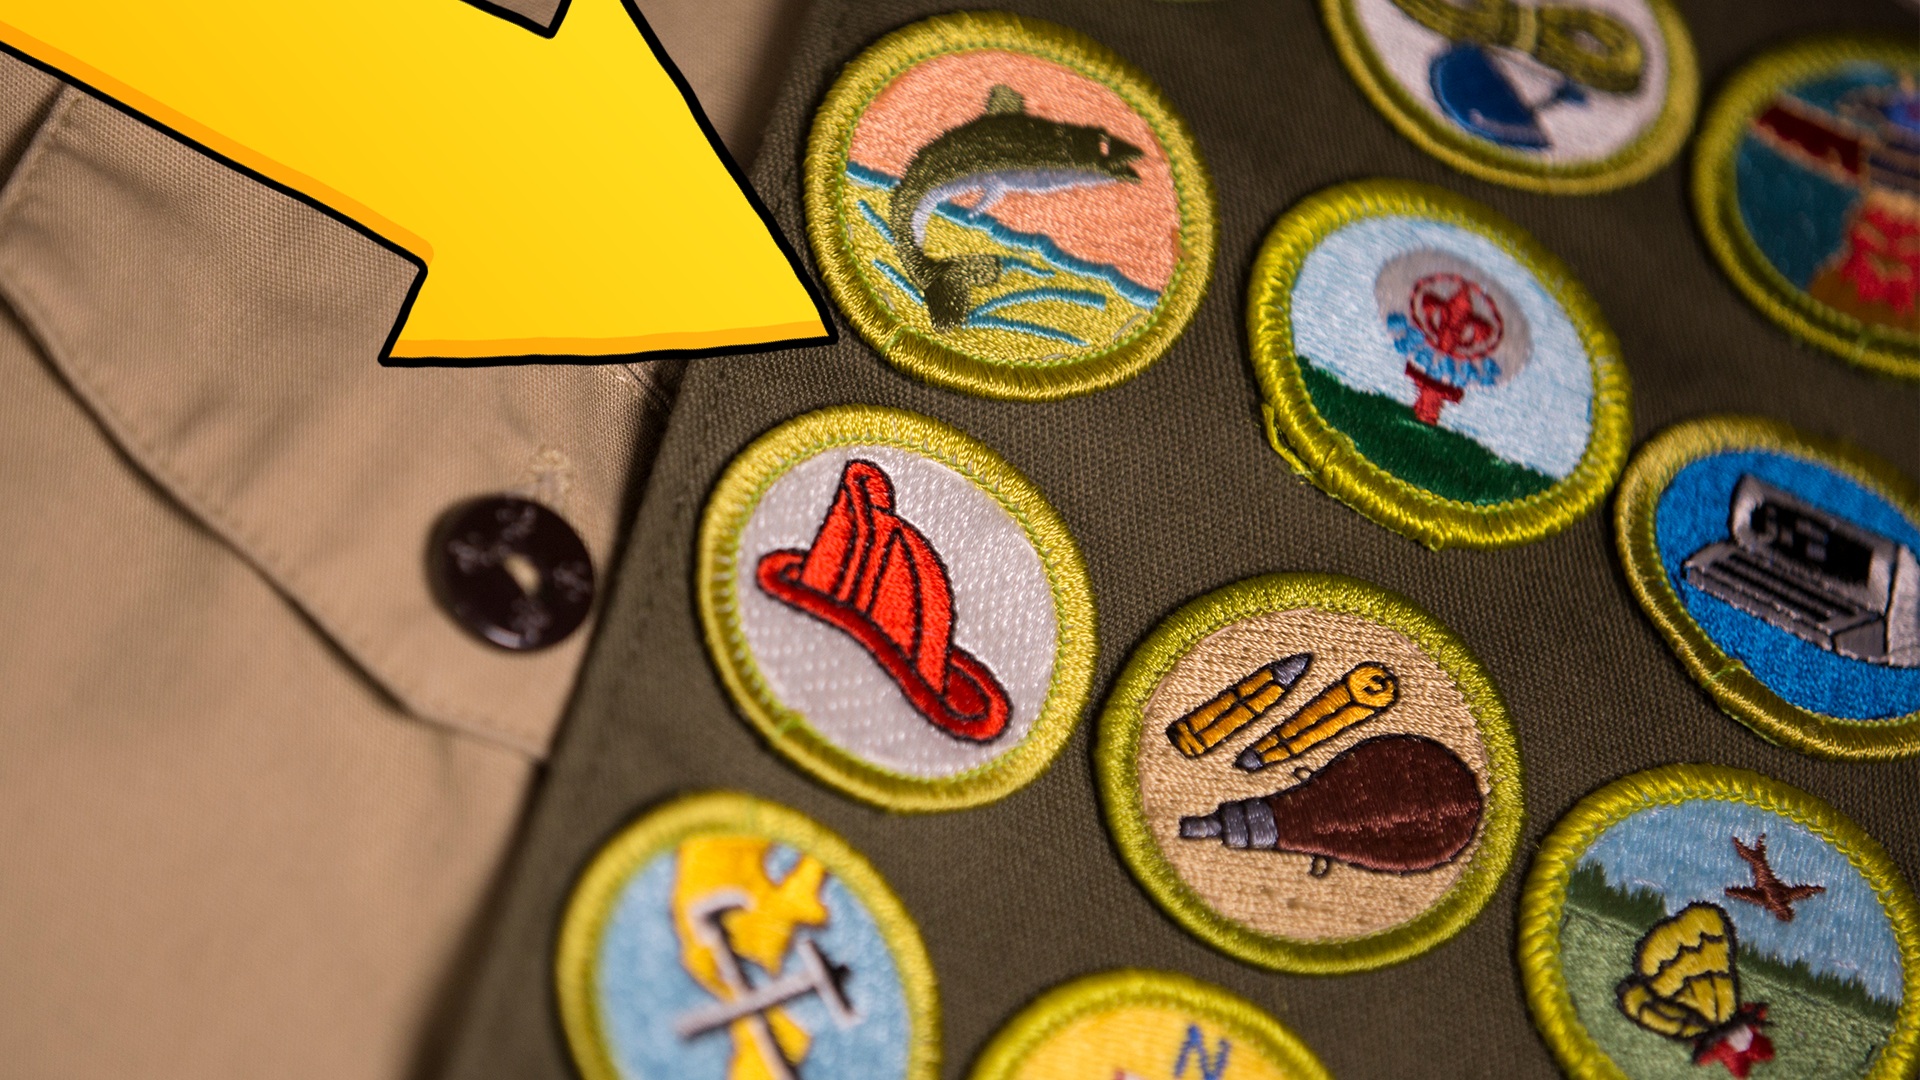 Yellow arrow pointing to Scout badges